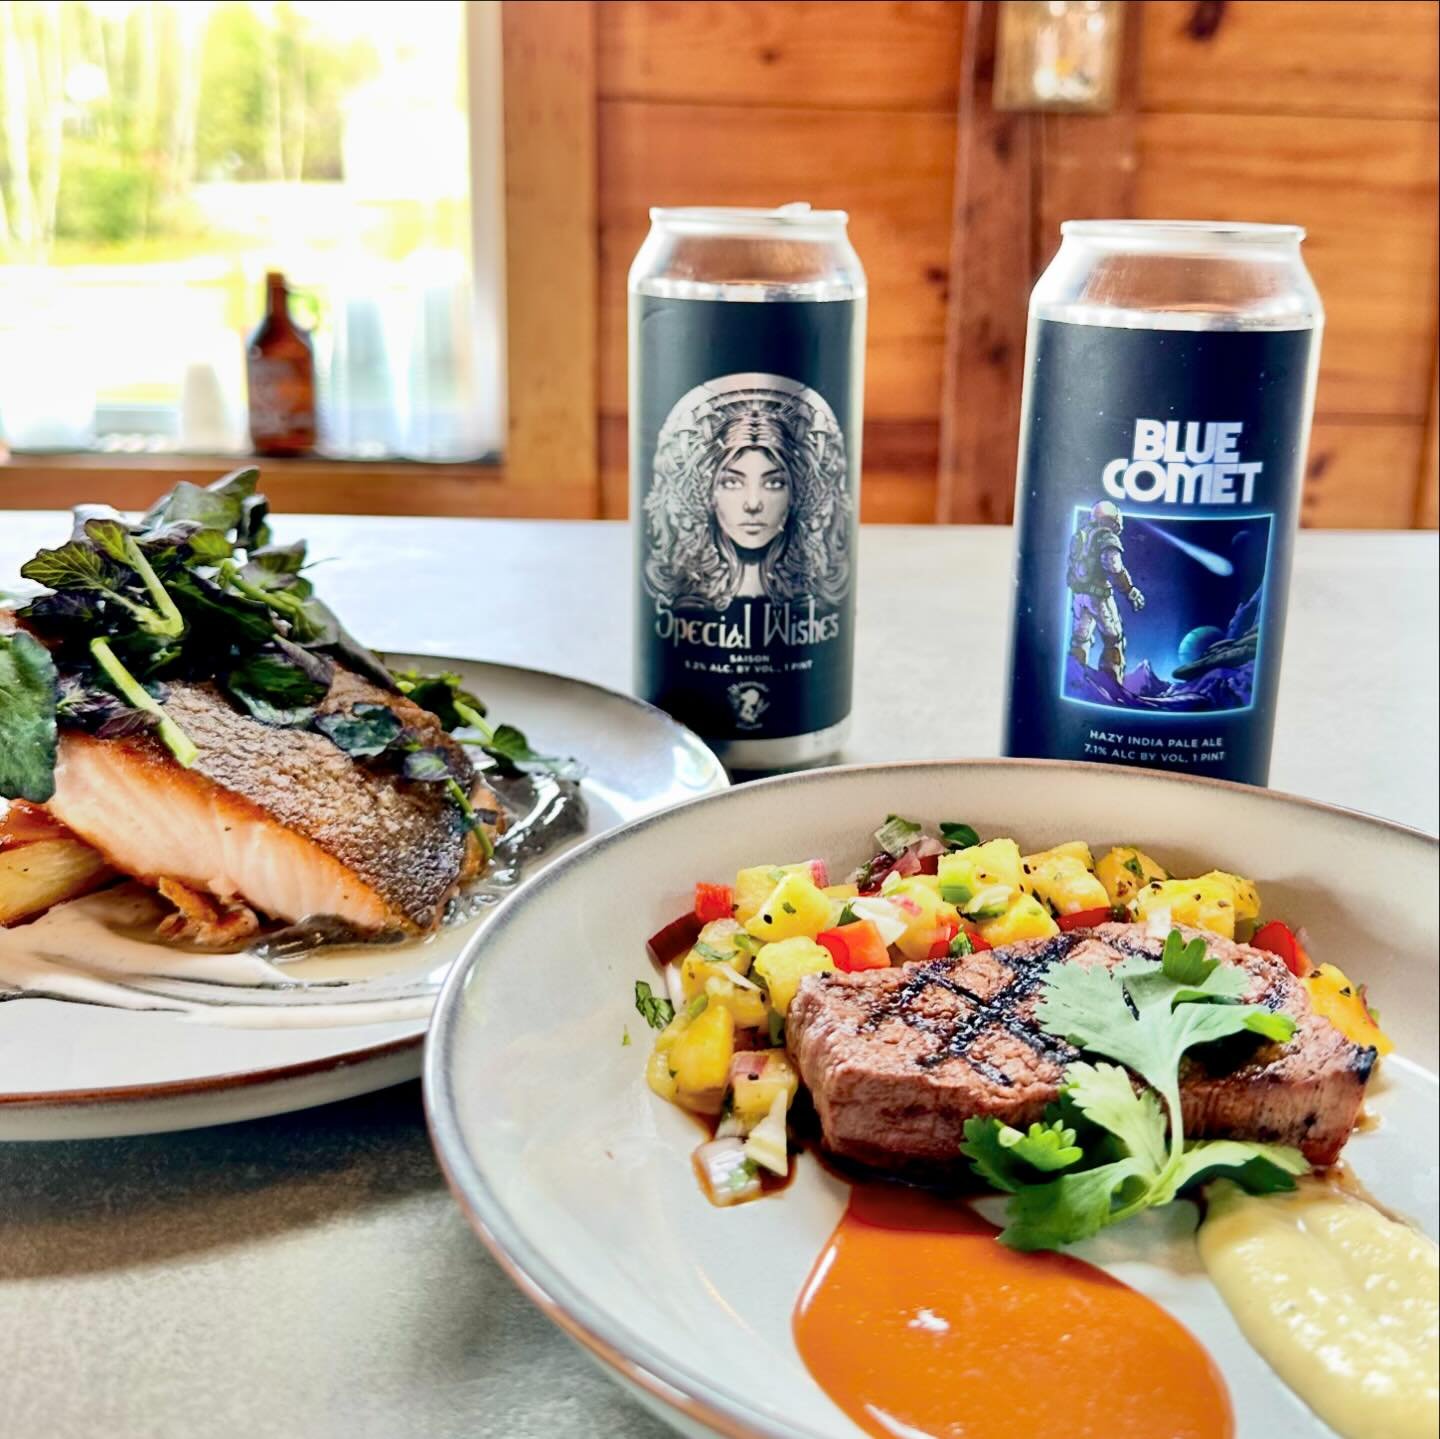 Friday Specials in honor of our @widowmakerbrew Tap Takeover! 🍻 

🍍 Grilled eye round steak with pineapple salsa, lemongrass pineapple BBQ sauce, and lemongrass aioli. 
Pair with Widowmaker Blue Comet NEIPA ☄️ 

🍣 Nordic Salmon with a potato pav&e